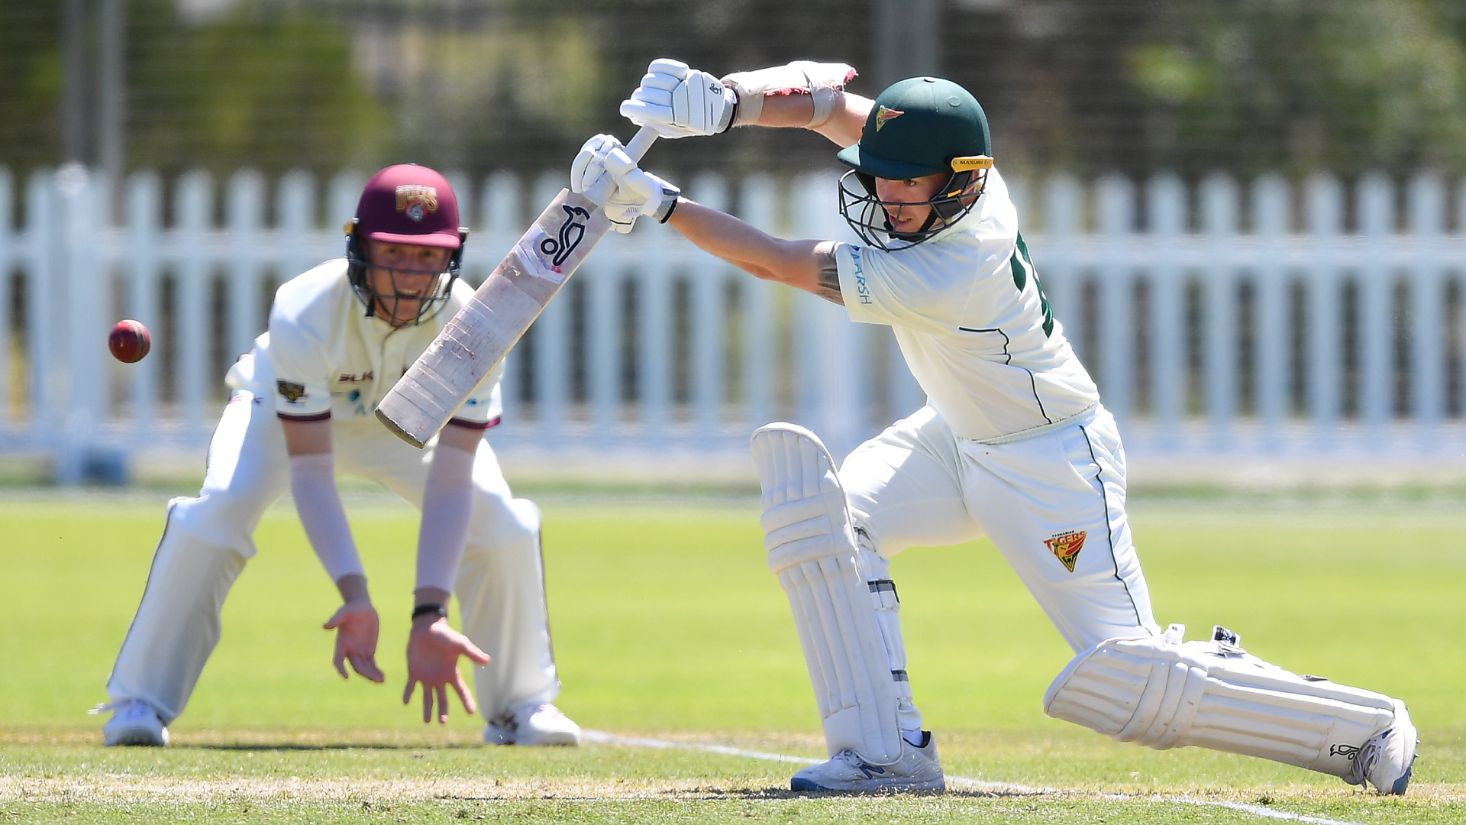 Sheffield Shield 2021-22 game between Tasmania and Queensland postponed due to Covid